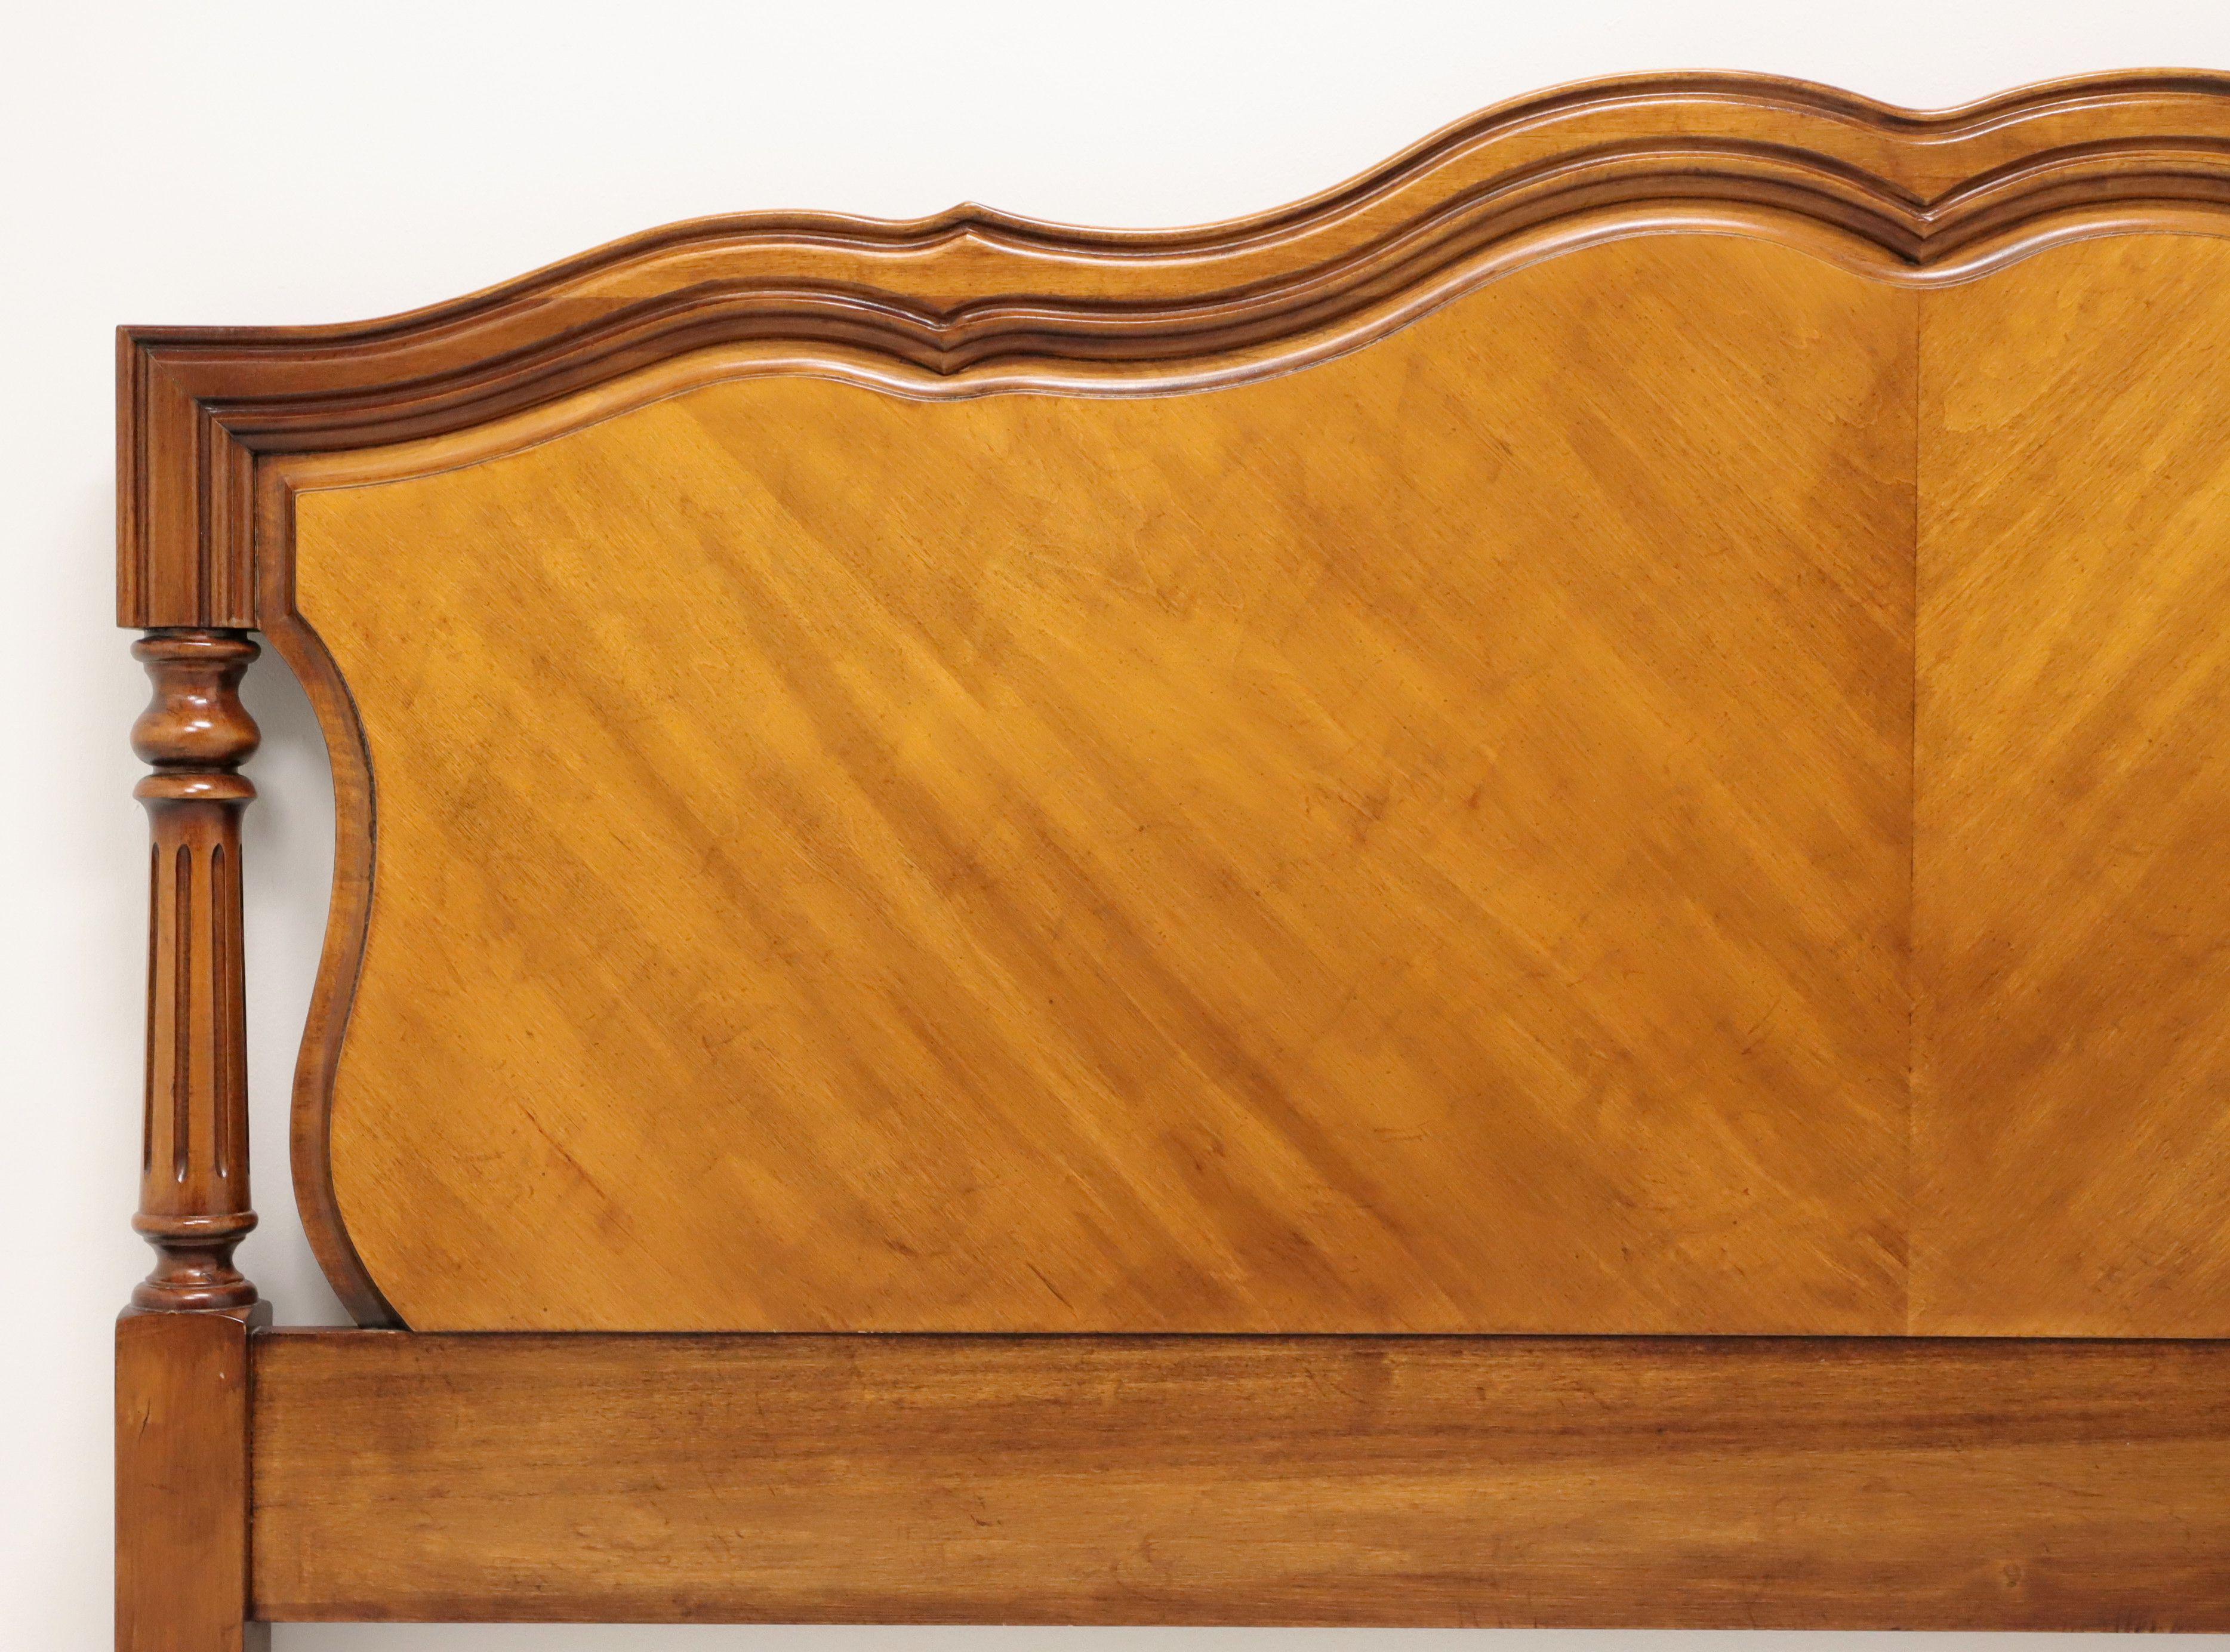 A French Country Louis XV style queen size headboard by Henry Link, part of Lexington Furniture, from their Margaux Collection. Cherry wood with inlays, scalloped arched top and column like sides. Made in Lexington, North Carolina, USA, in the late